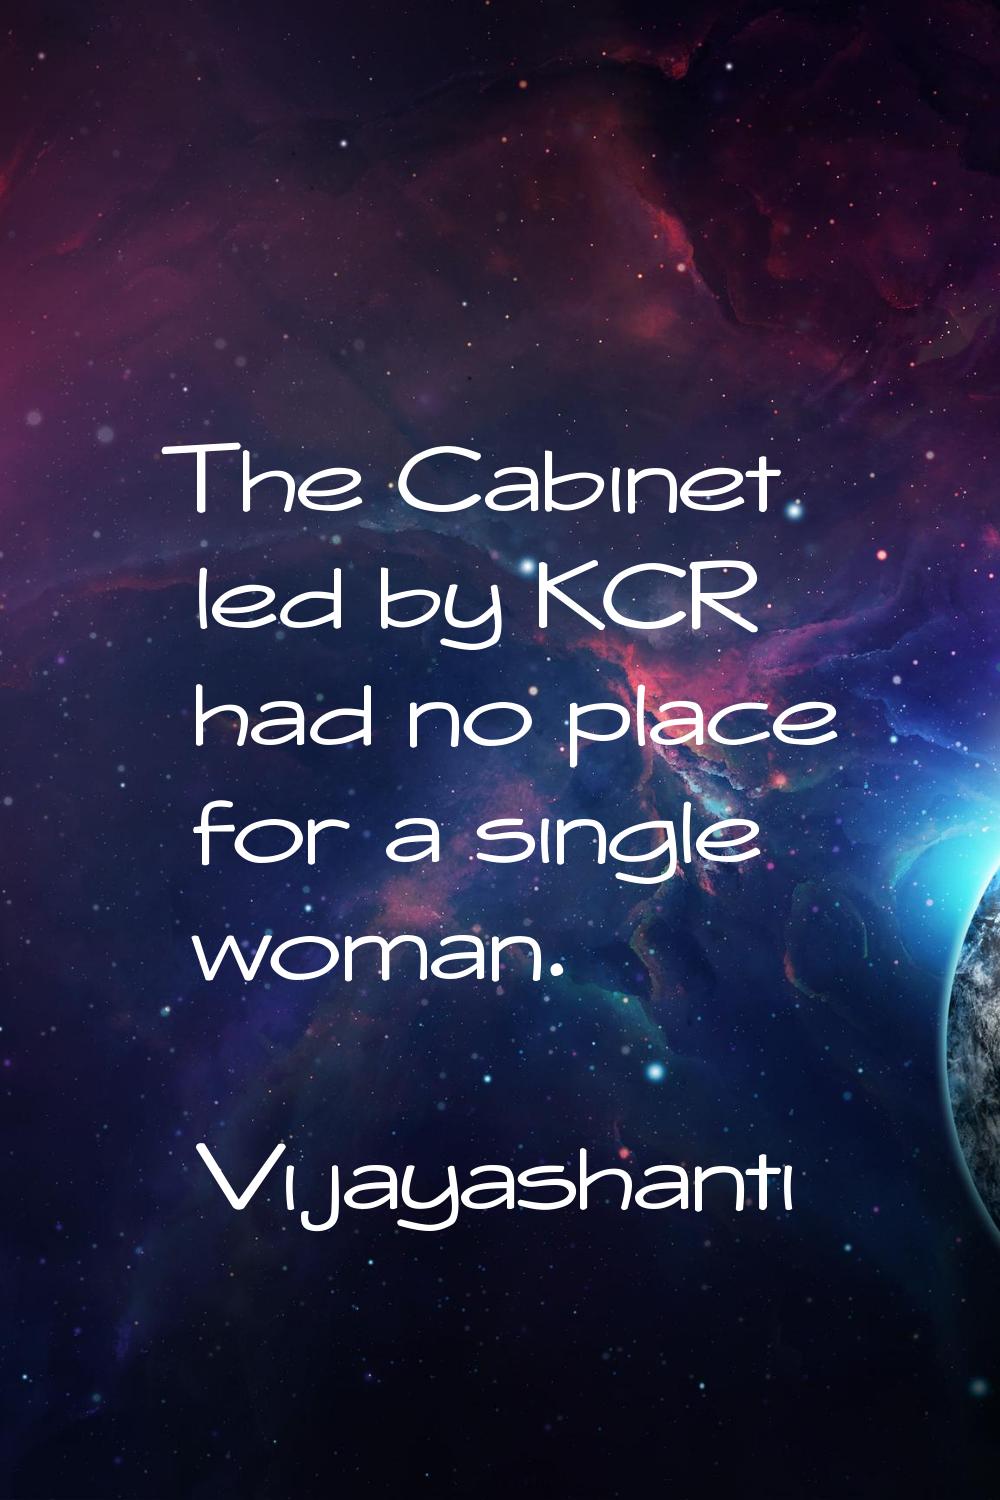 The Cabinet led by KCR had no place for a single woman.